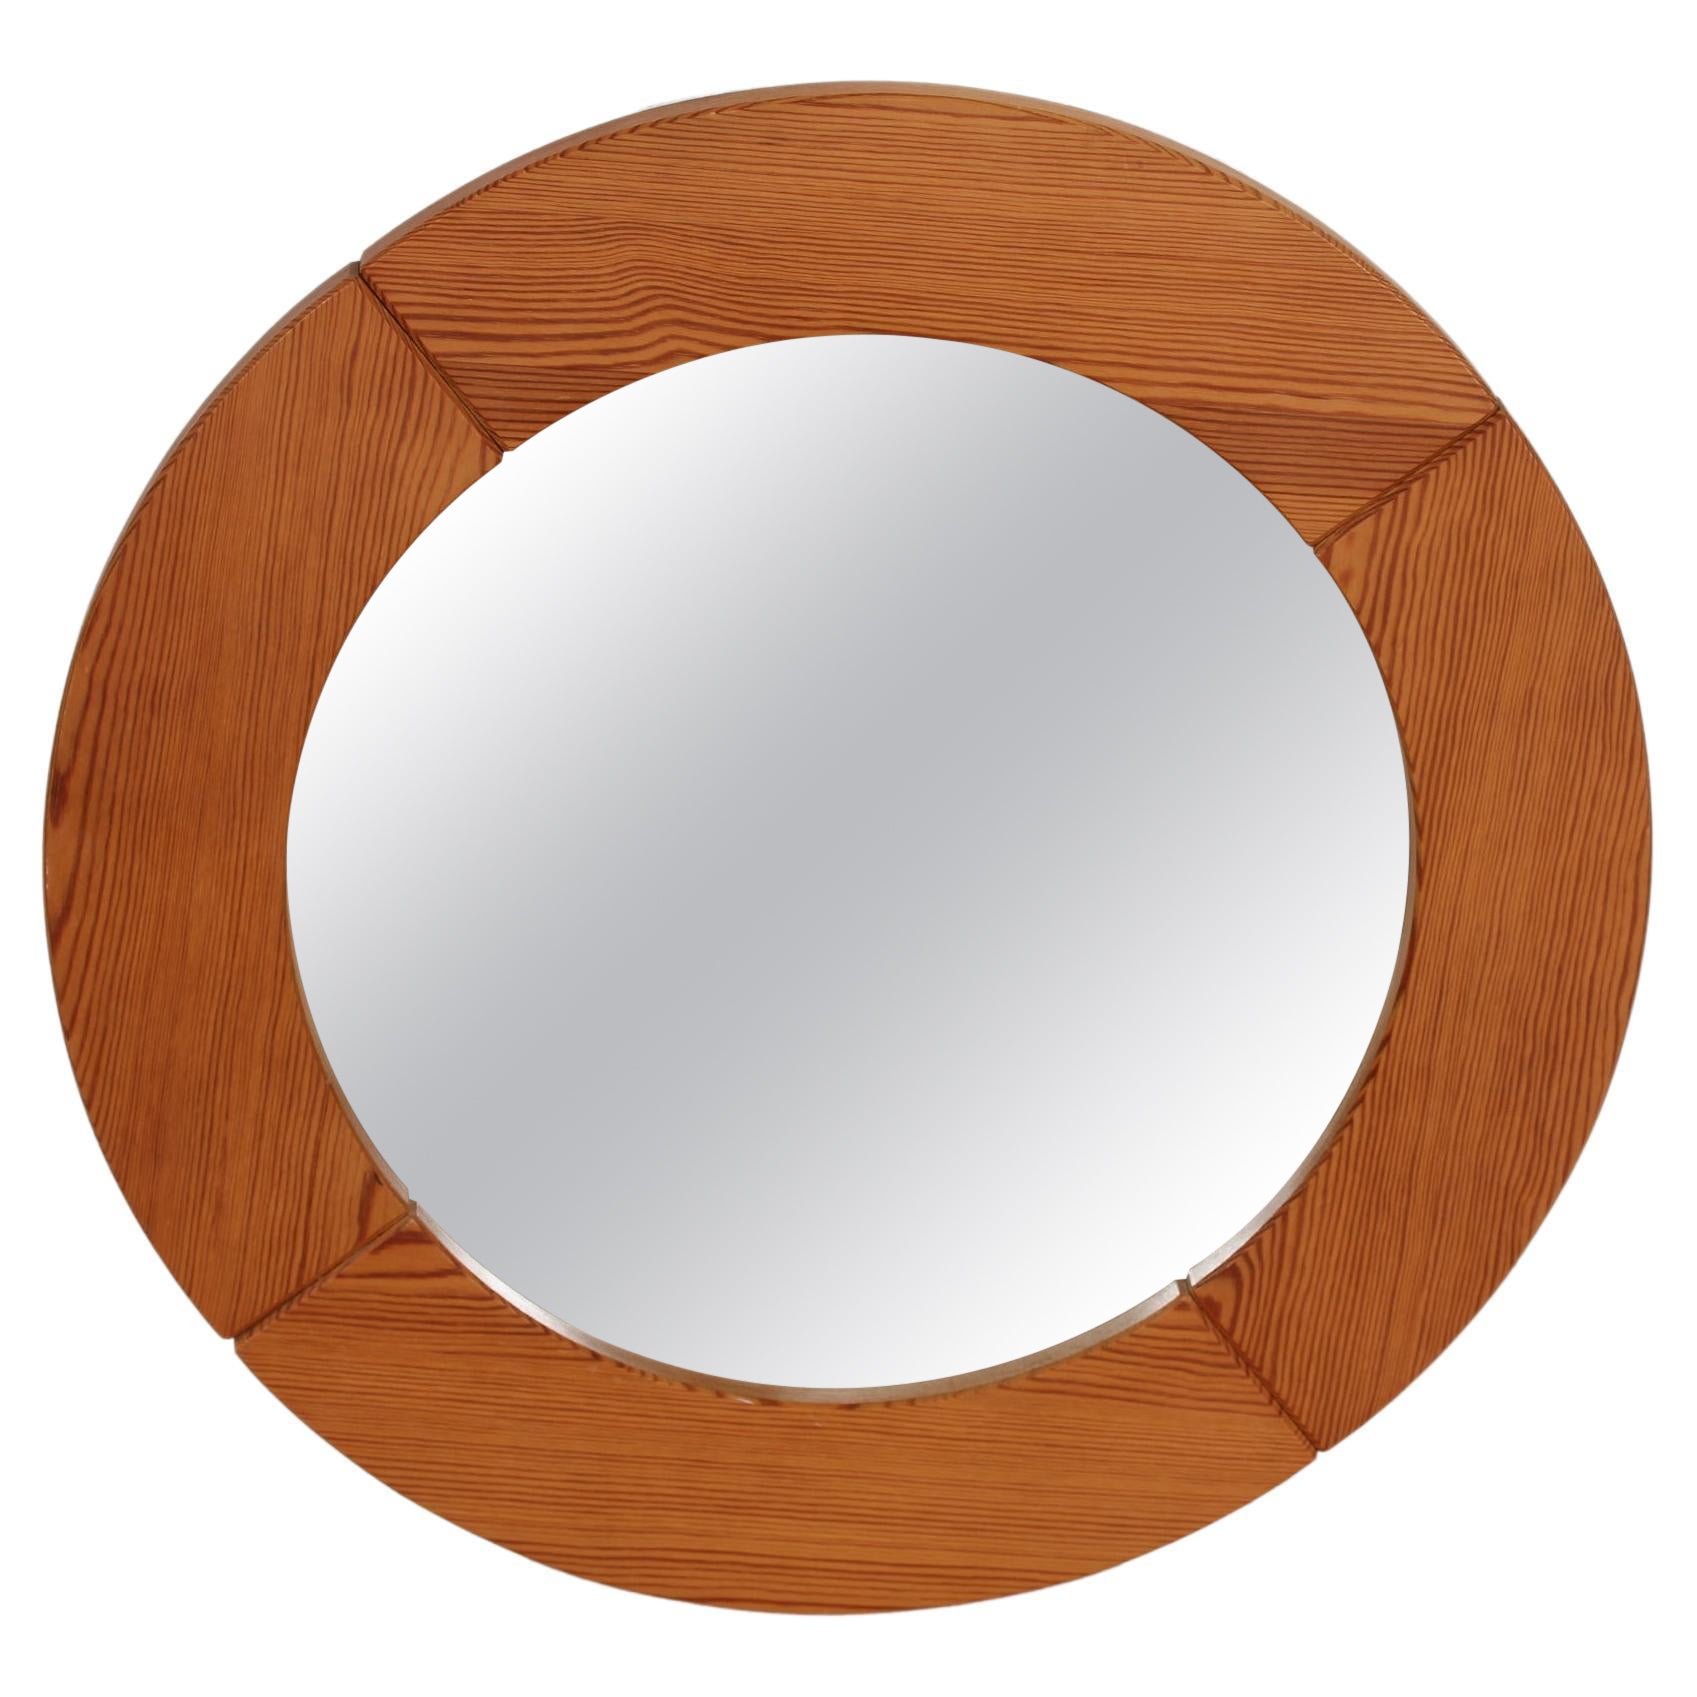 Danish Modern Brutalist style Round Wall Mirror Made of Pine in Denmark 1980's For Sale